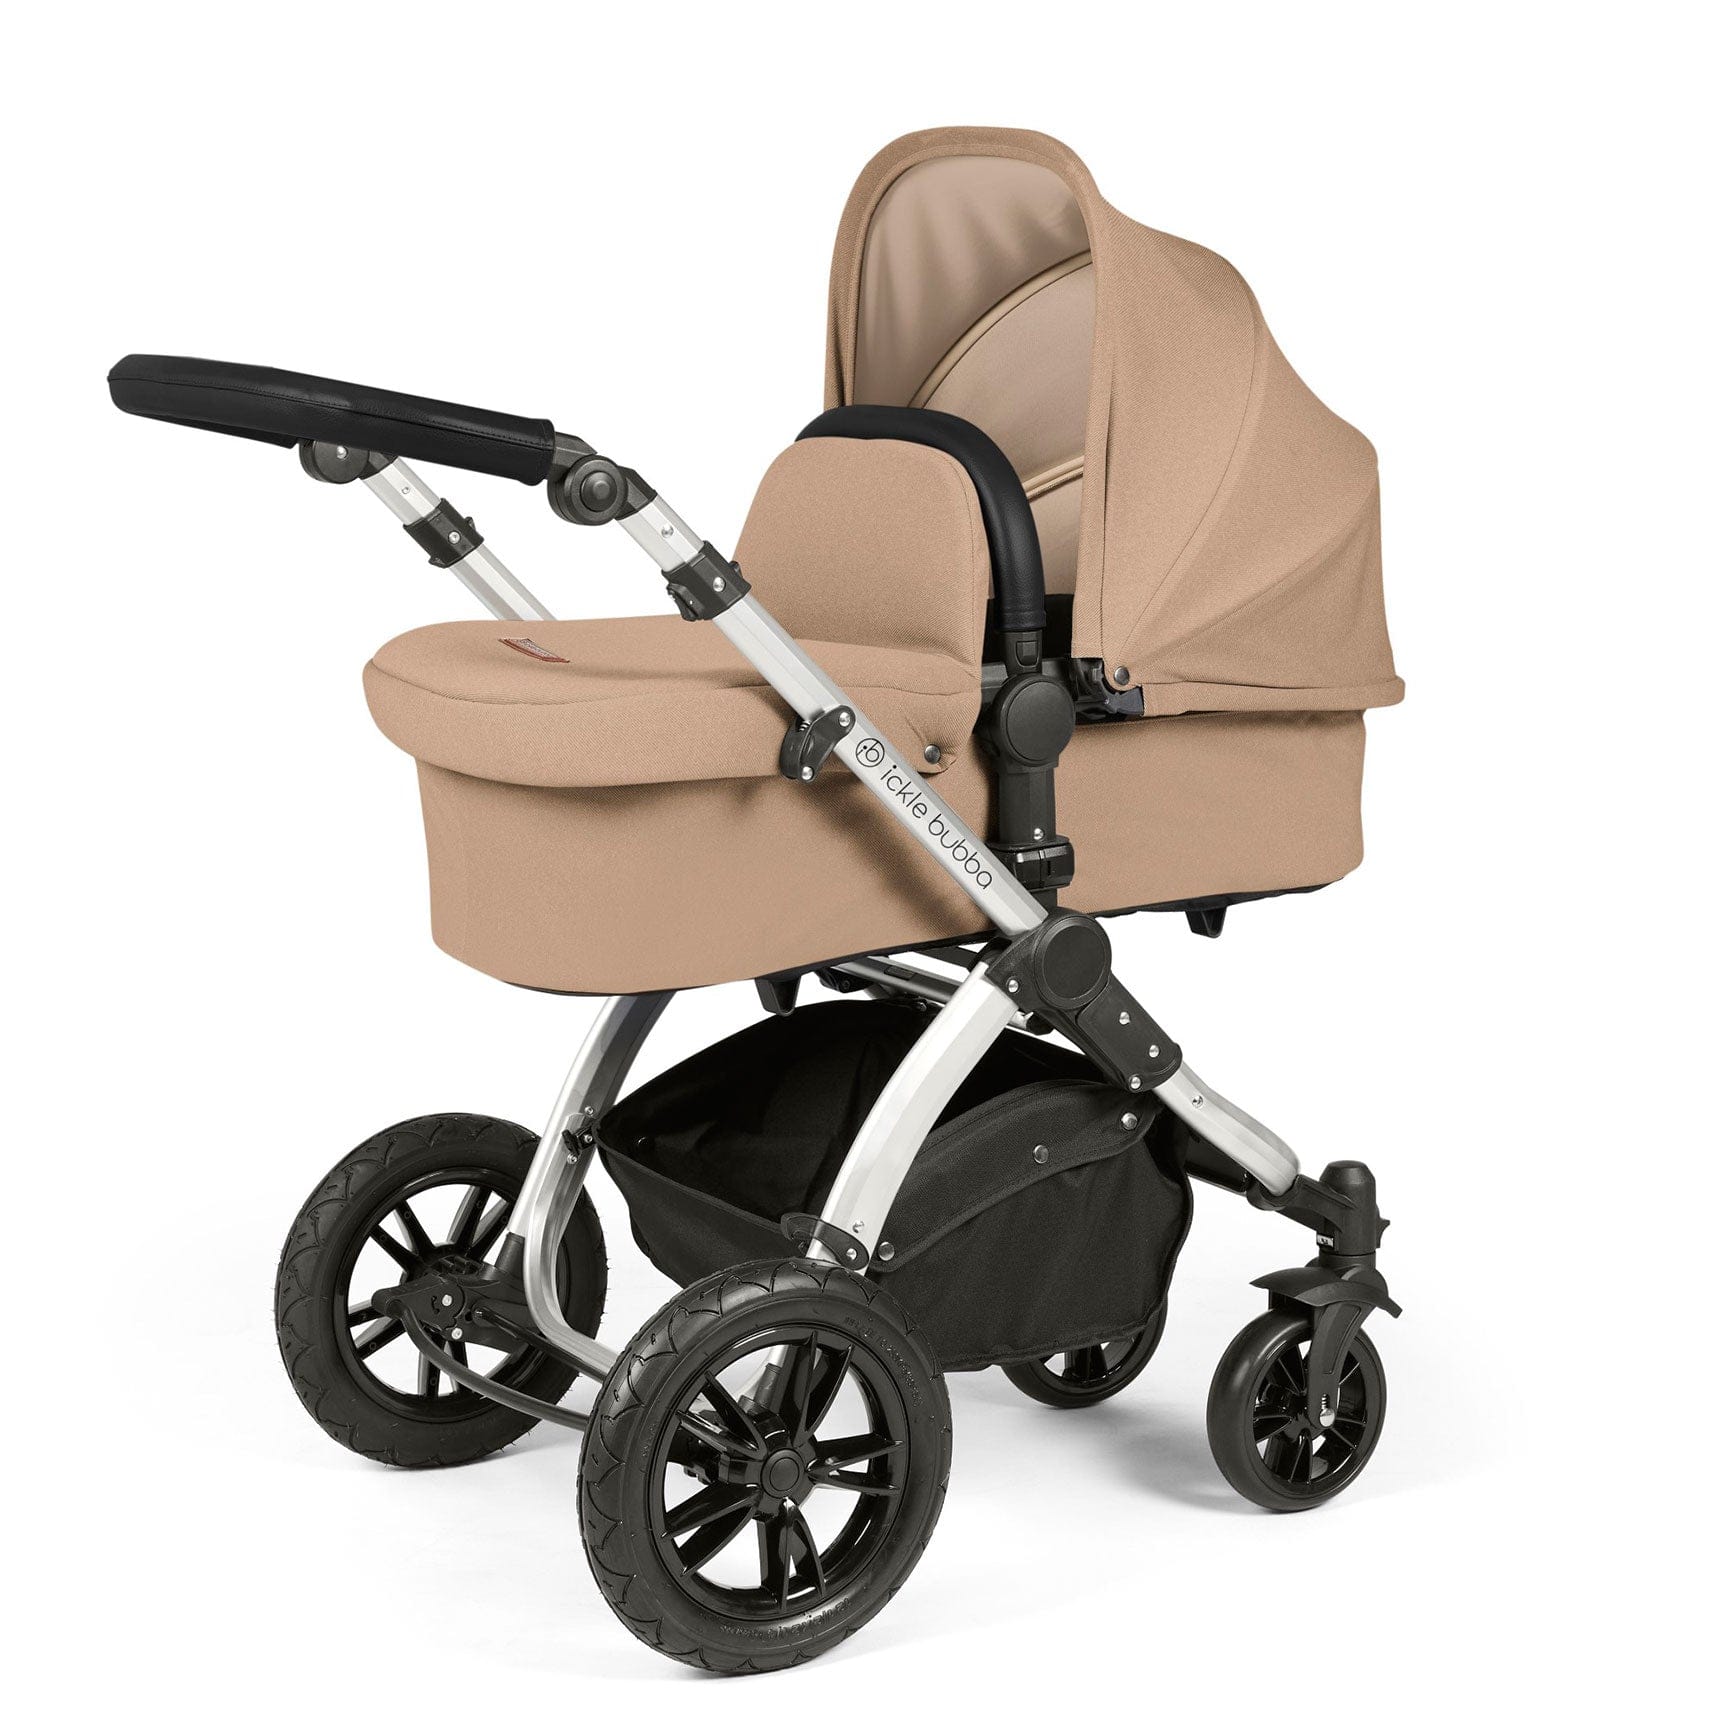 Ickle Bubba travel systems Ickle Bubba Stomp Luxe All-in-One Travel System with Isofix Base - Silver/Desert/Black 10-011-300-257